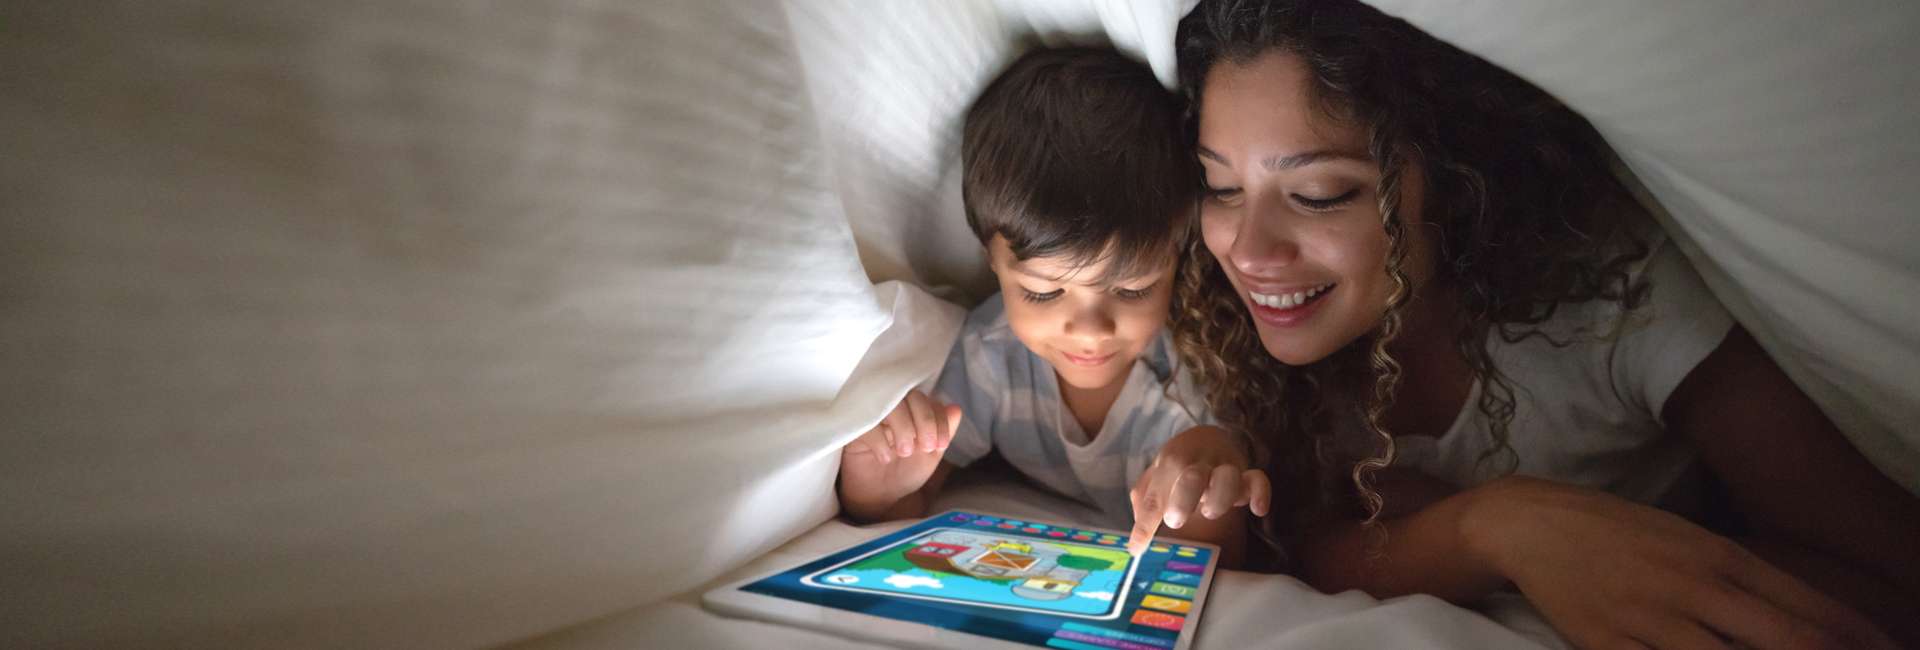 woman and her son on an ipad under the sheets